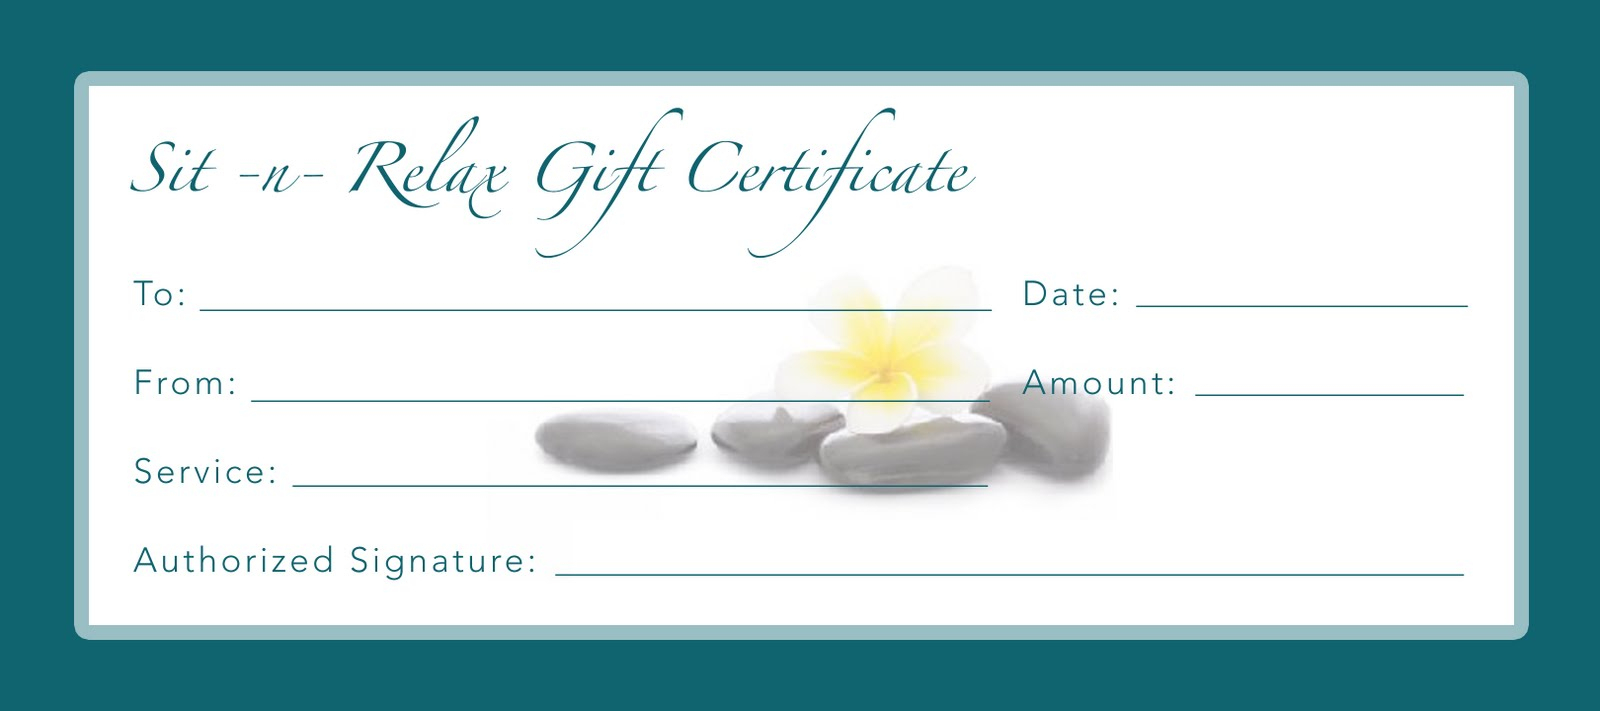 Printable Gift Certificate Template - D-Templates - Free Printable Gift Certificate Templates For Massage